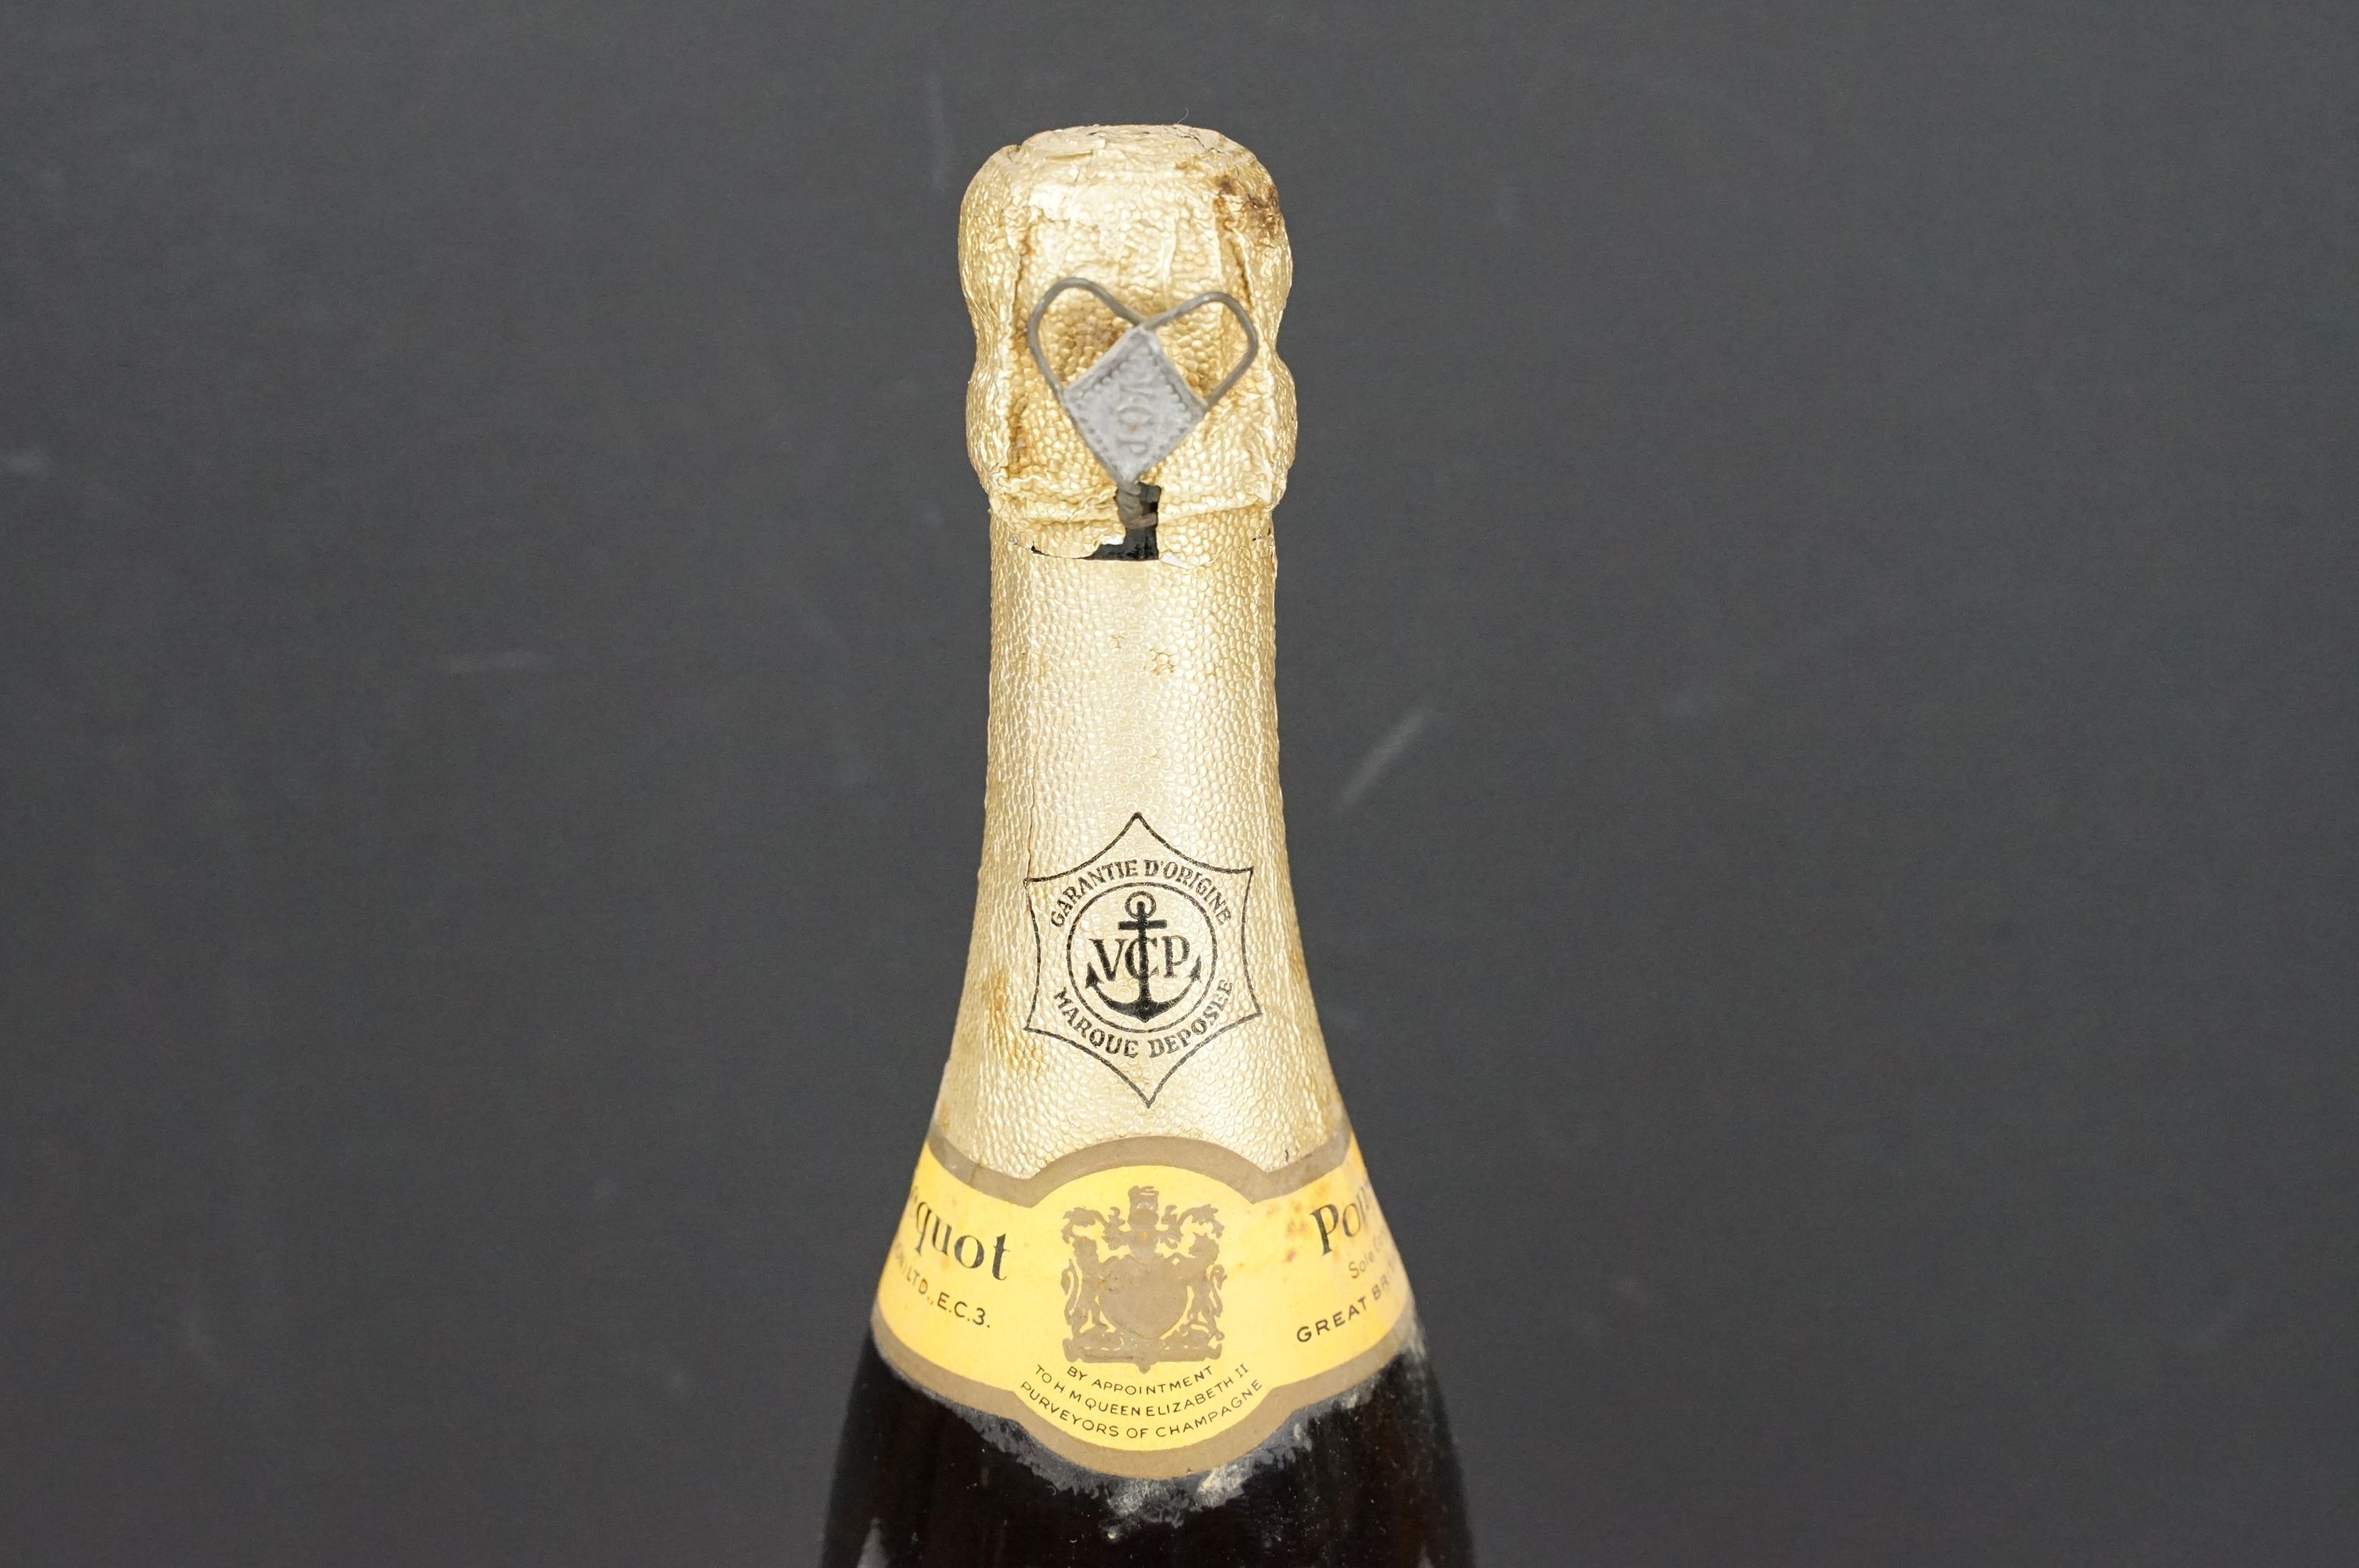 A bottle of 1947 Veuve Clicquot Ponsardin Champagne. Measures 27cm tall. - Image 3 of 3